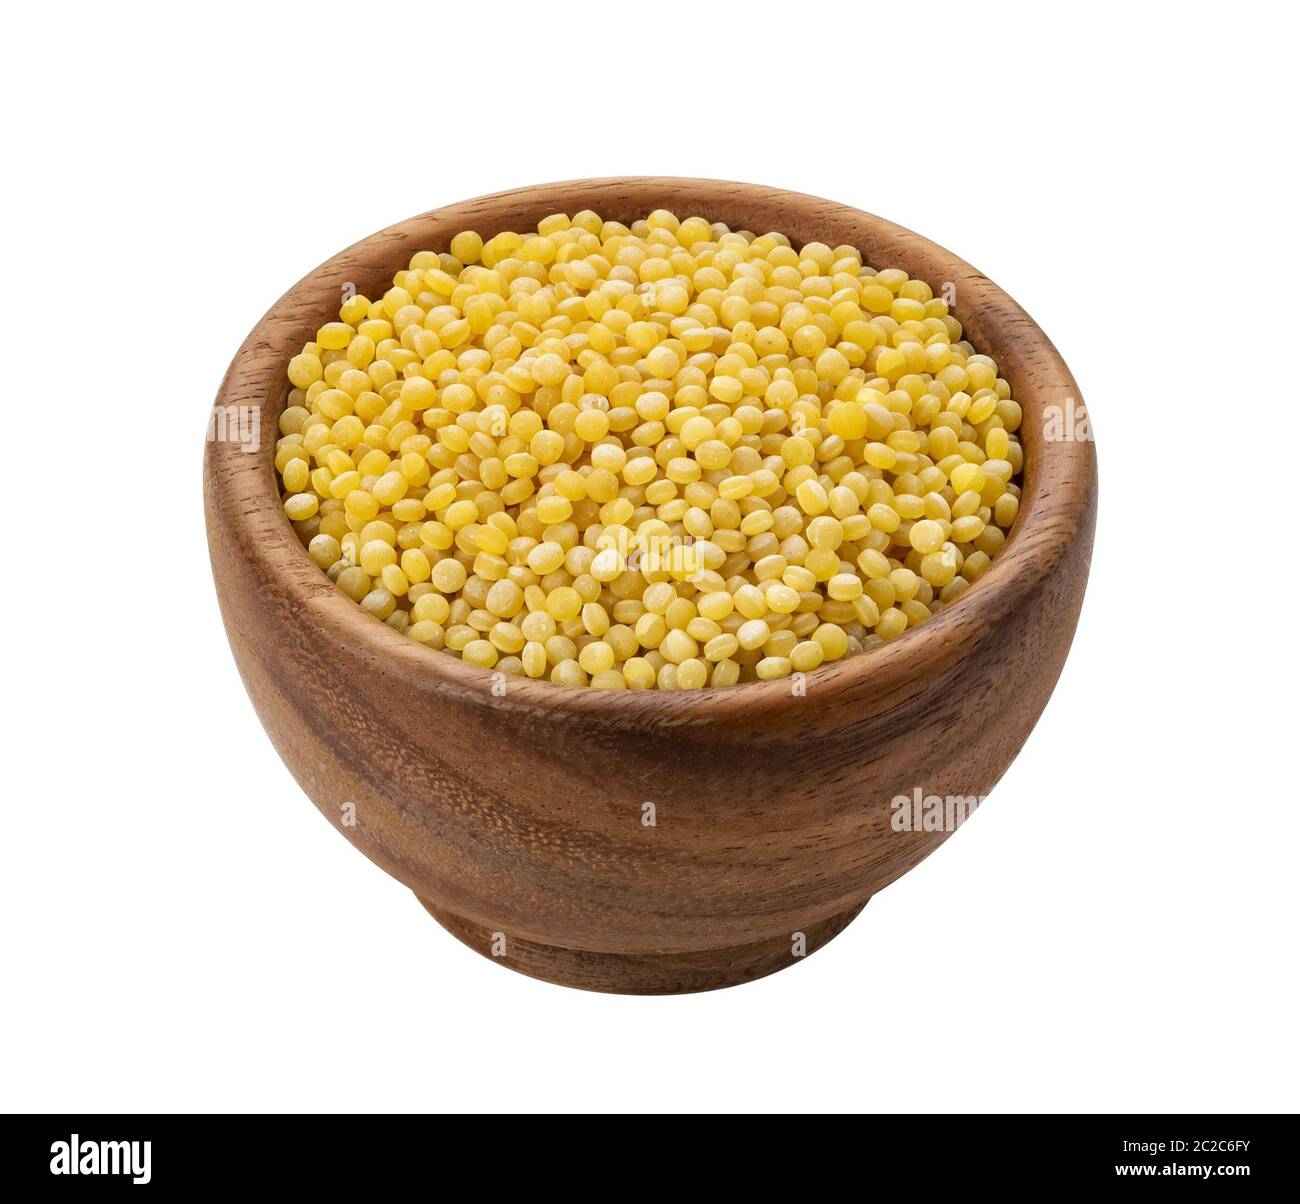 Israeli couscous. Ptitim in wooden bowl isolated on white background Stock Photo